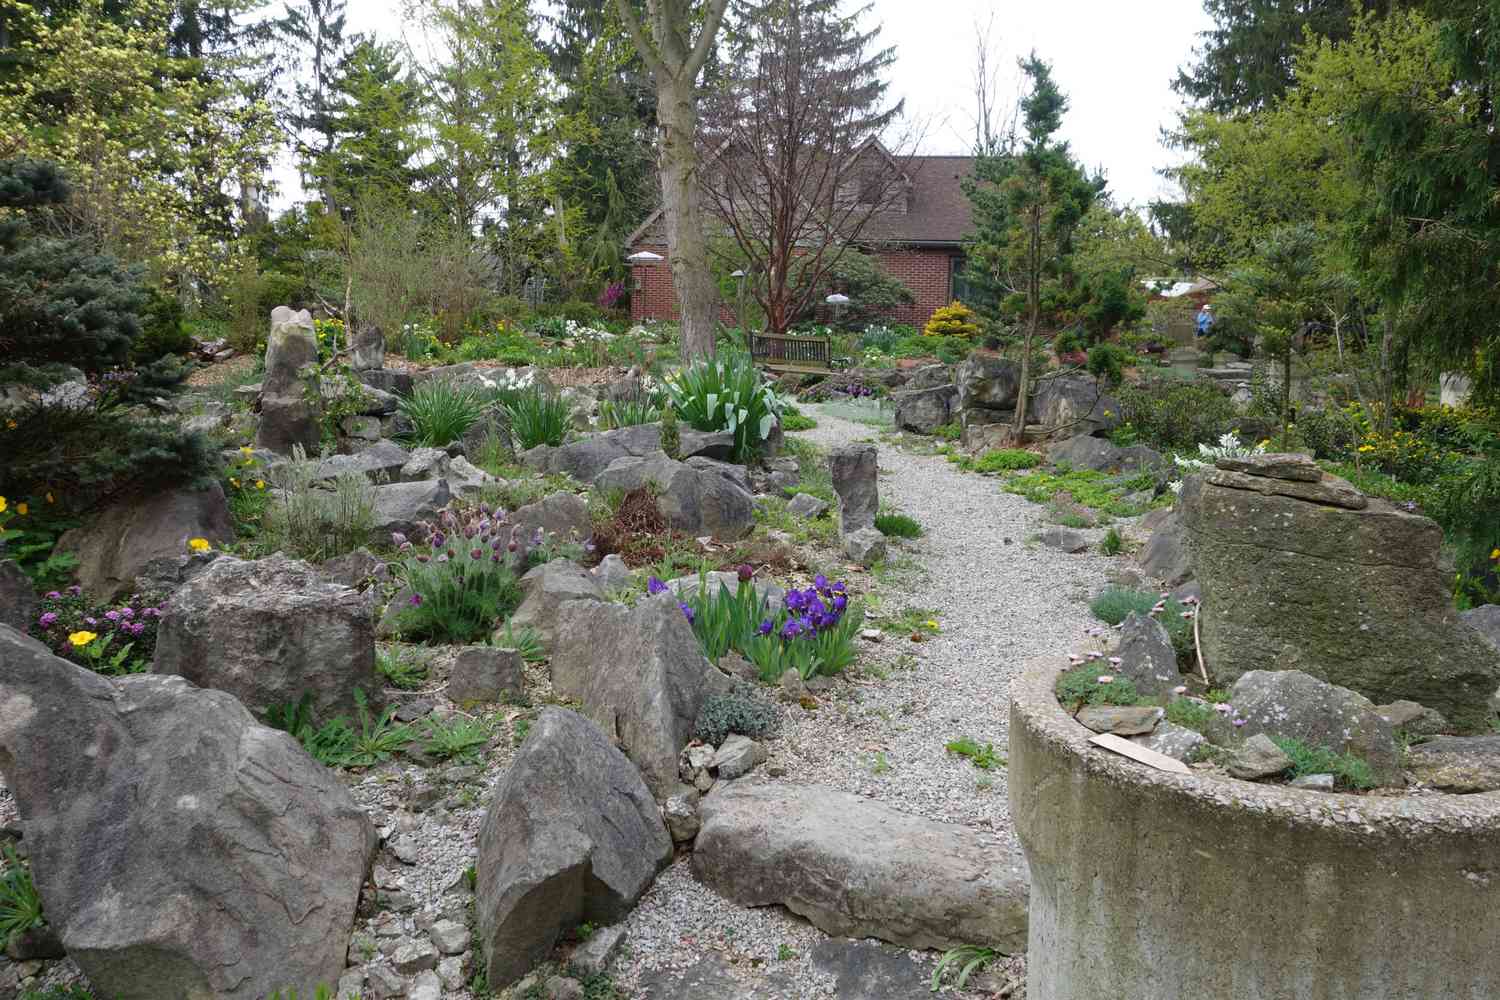 Rock garden with winding gravel path and house in background